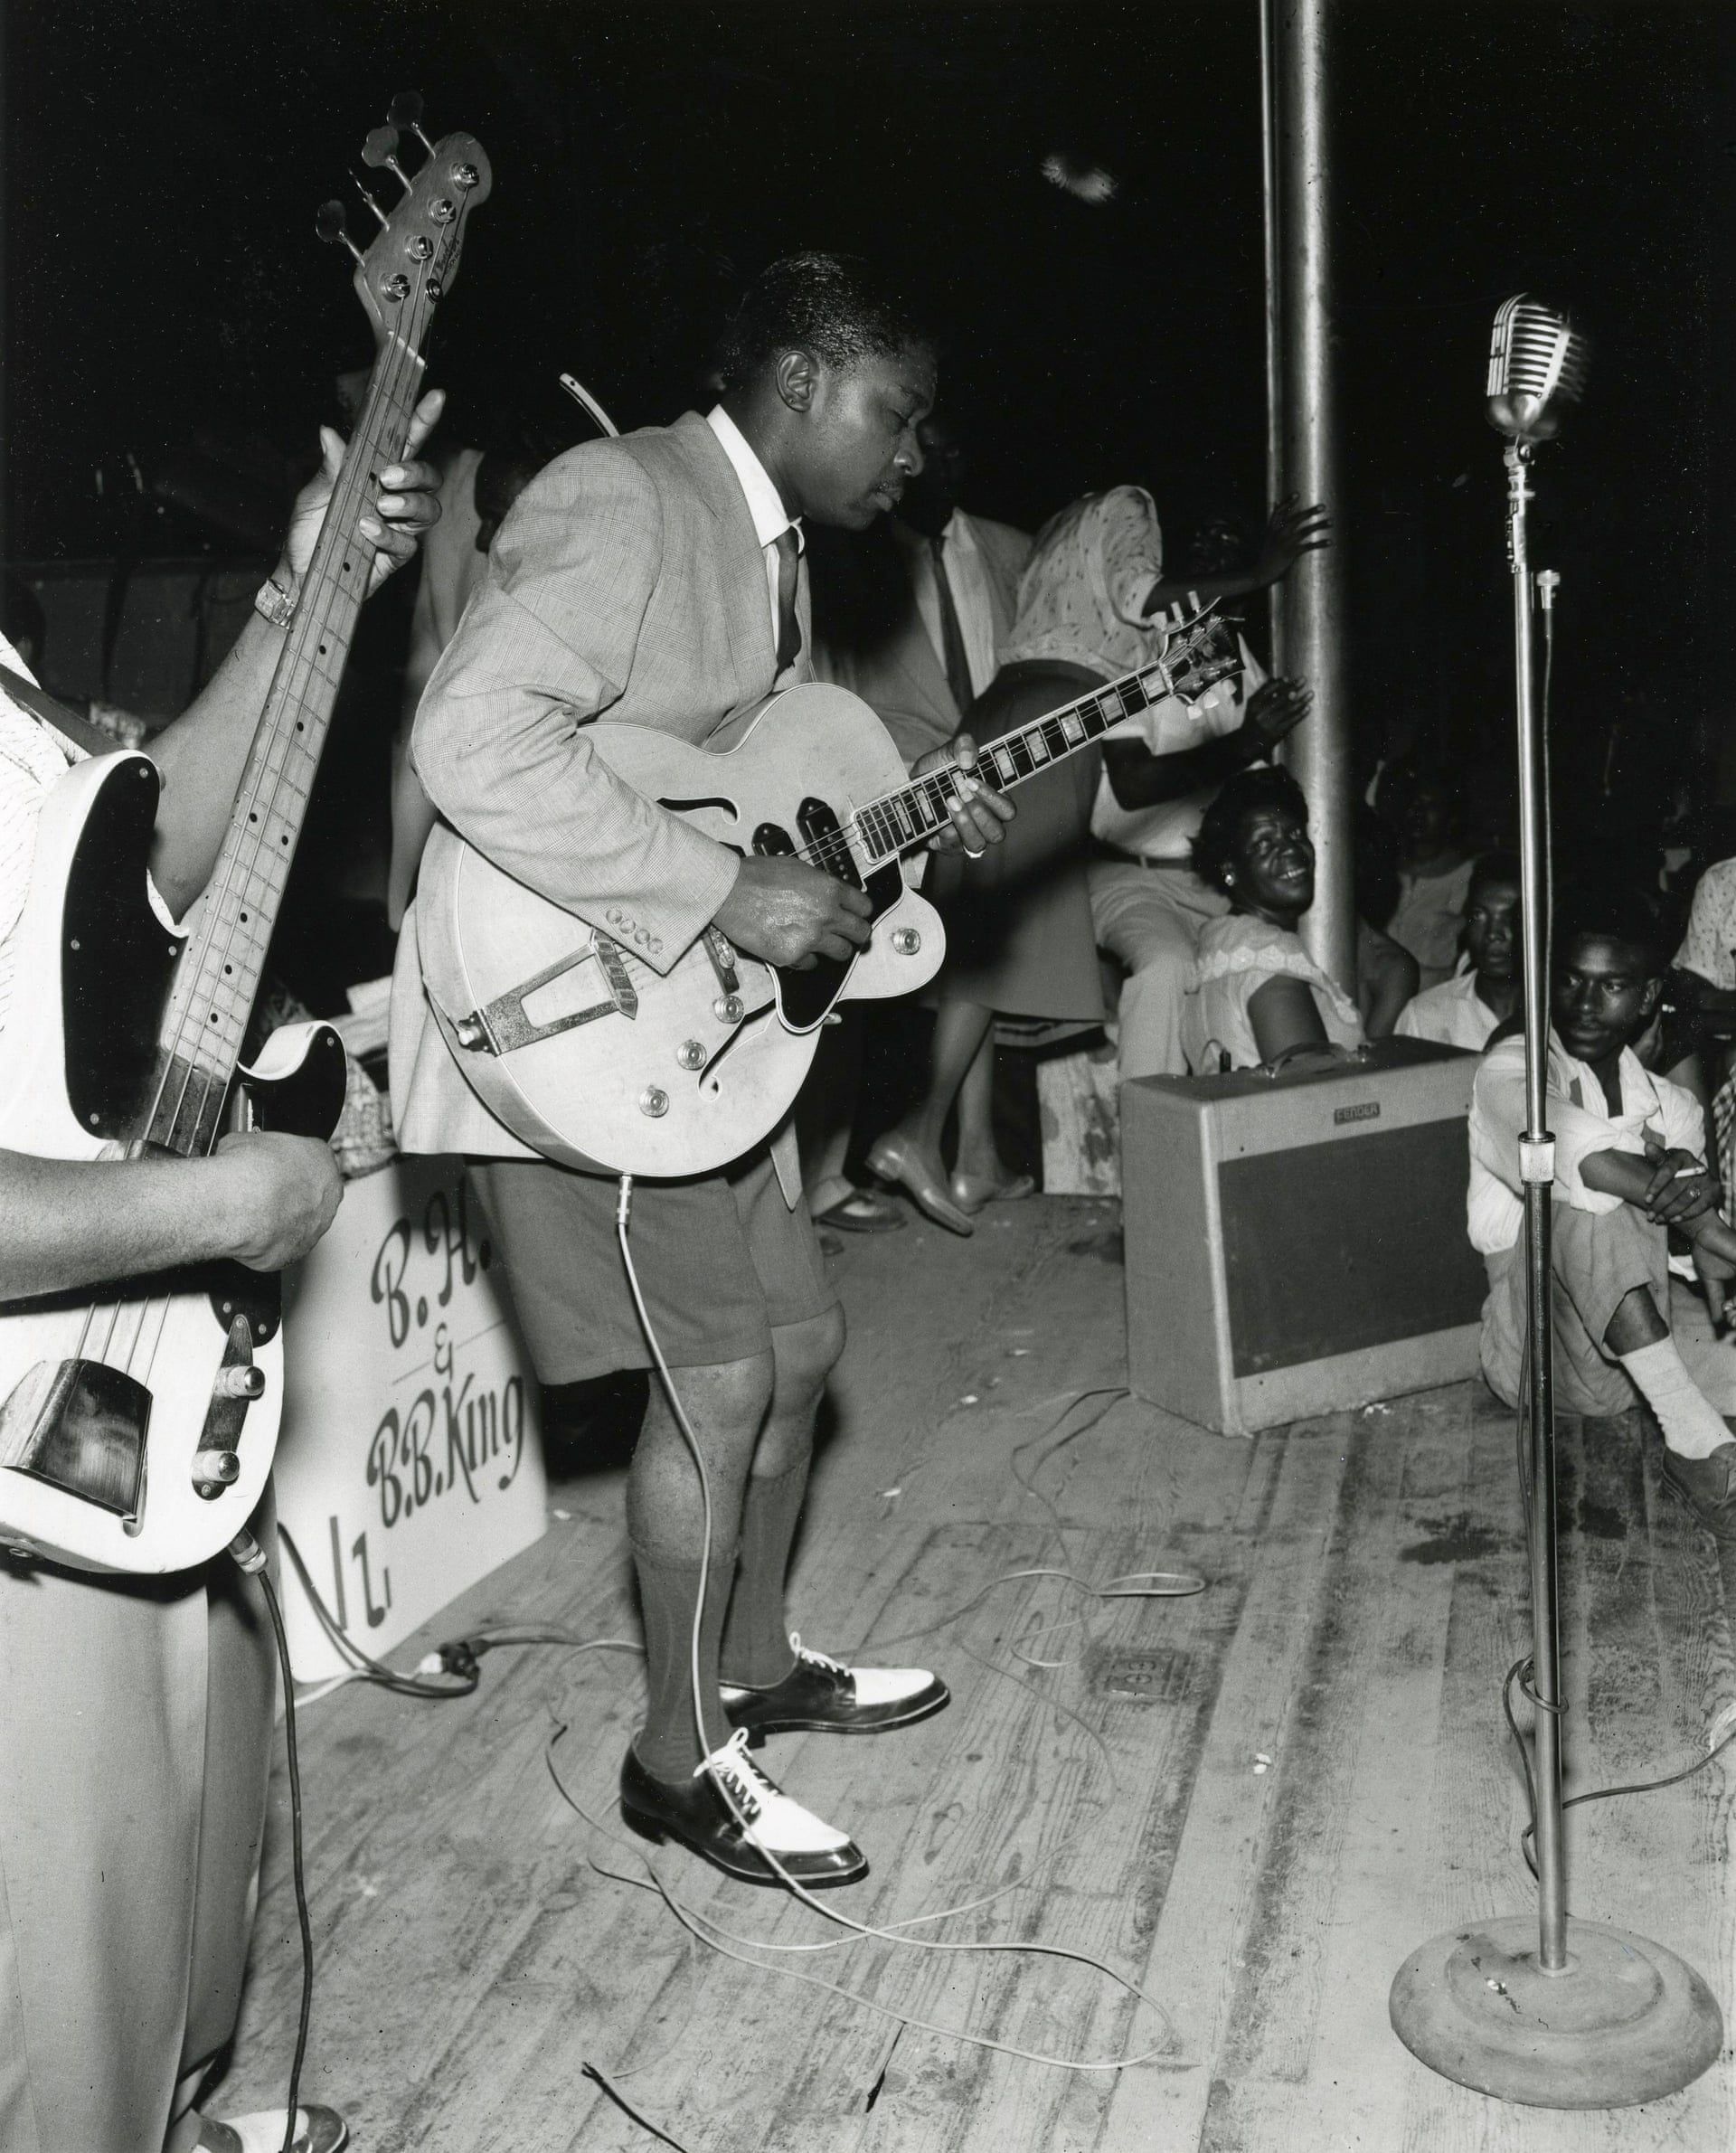 BB King on stage at the Hippodrome, Beale Street in Memphis, TN, with Bill Harvey, c 1950